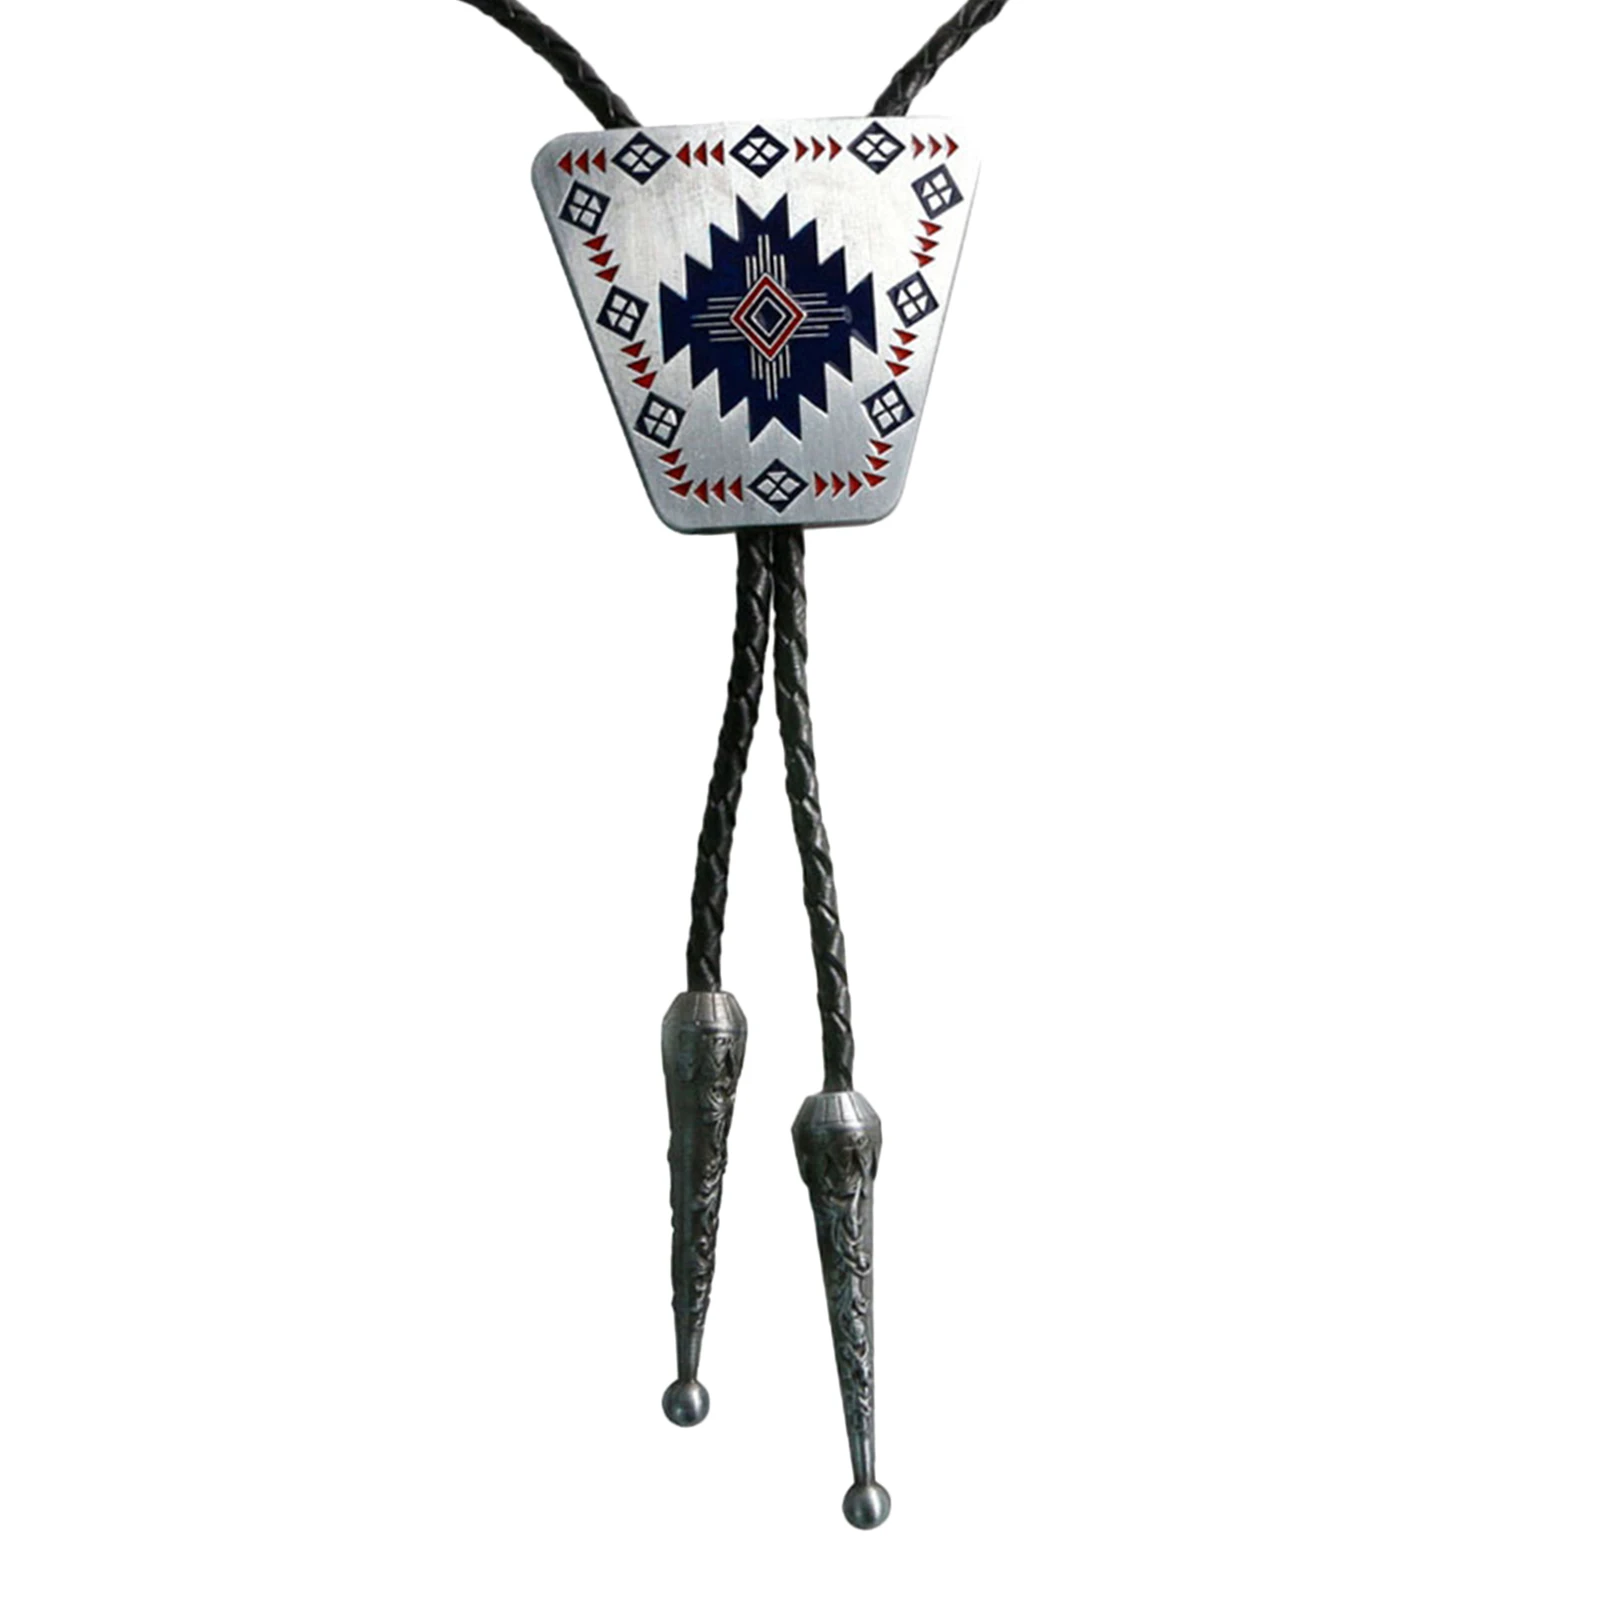 Western Indian Country Leather Rodeo Bola Bolo Tie Cowboy Men Tie